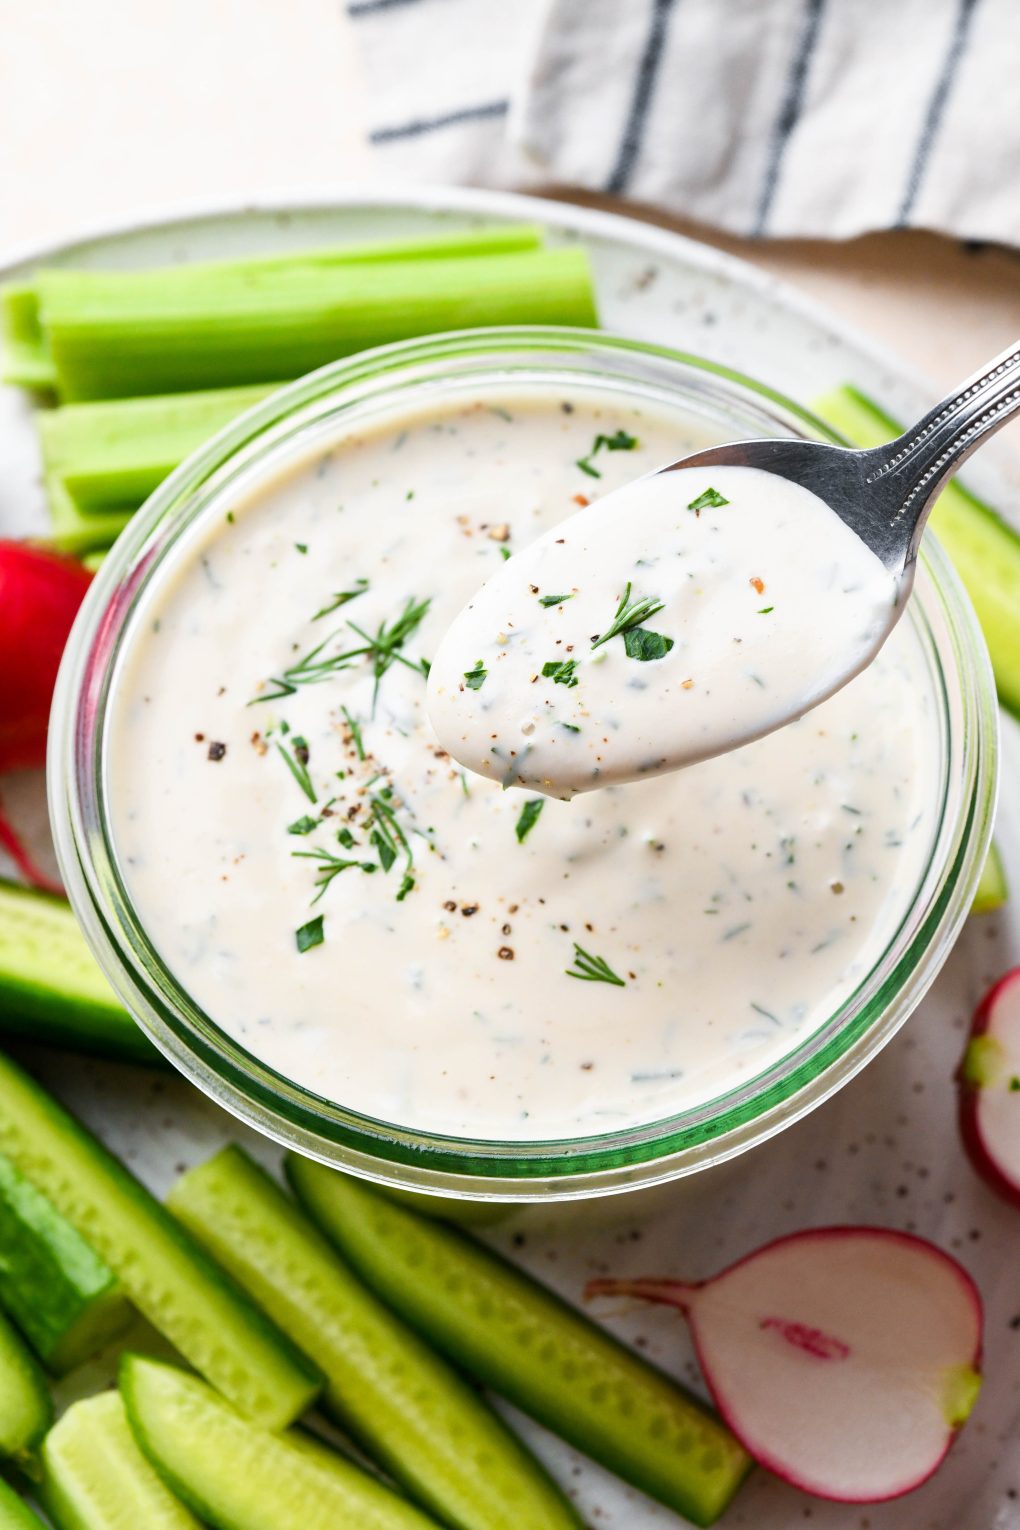 Vegan ranch in a small glass jar with a spoon lifting some of the dressing out to show the creamy texture.